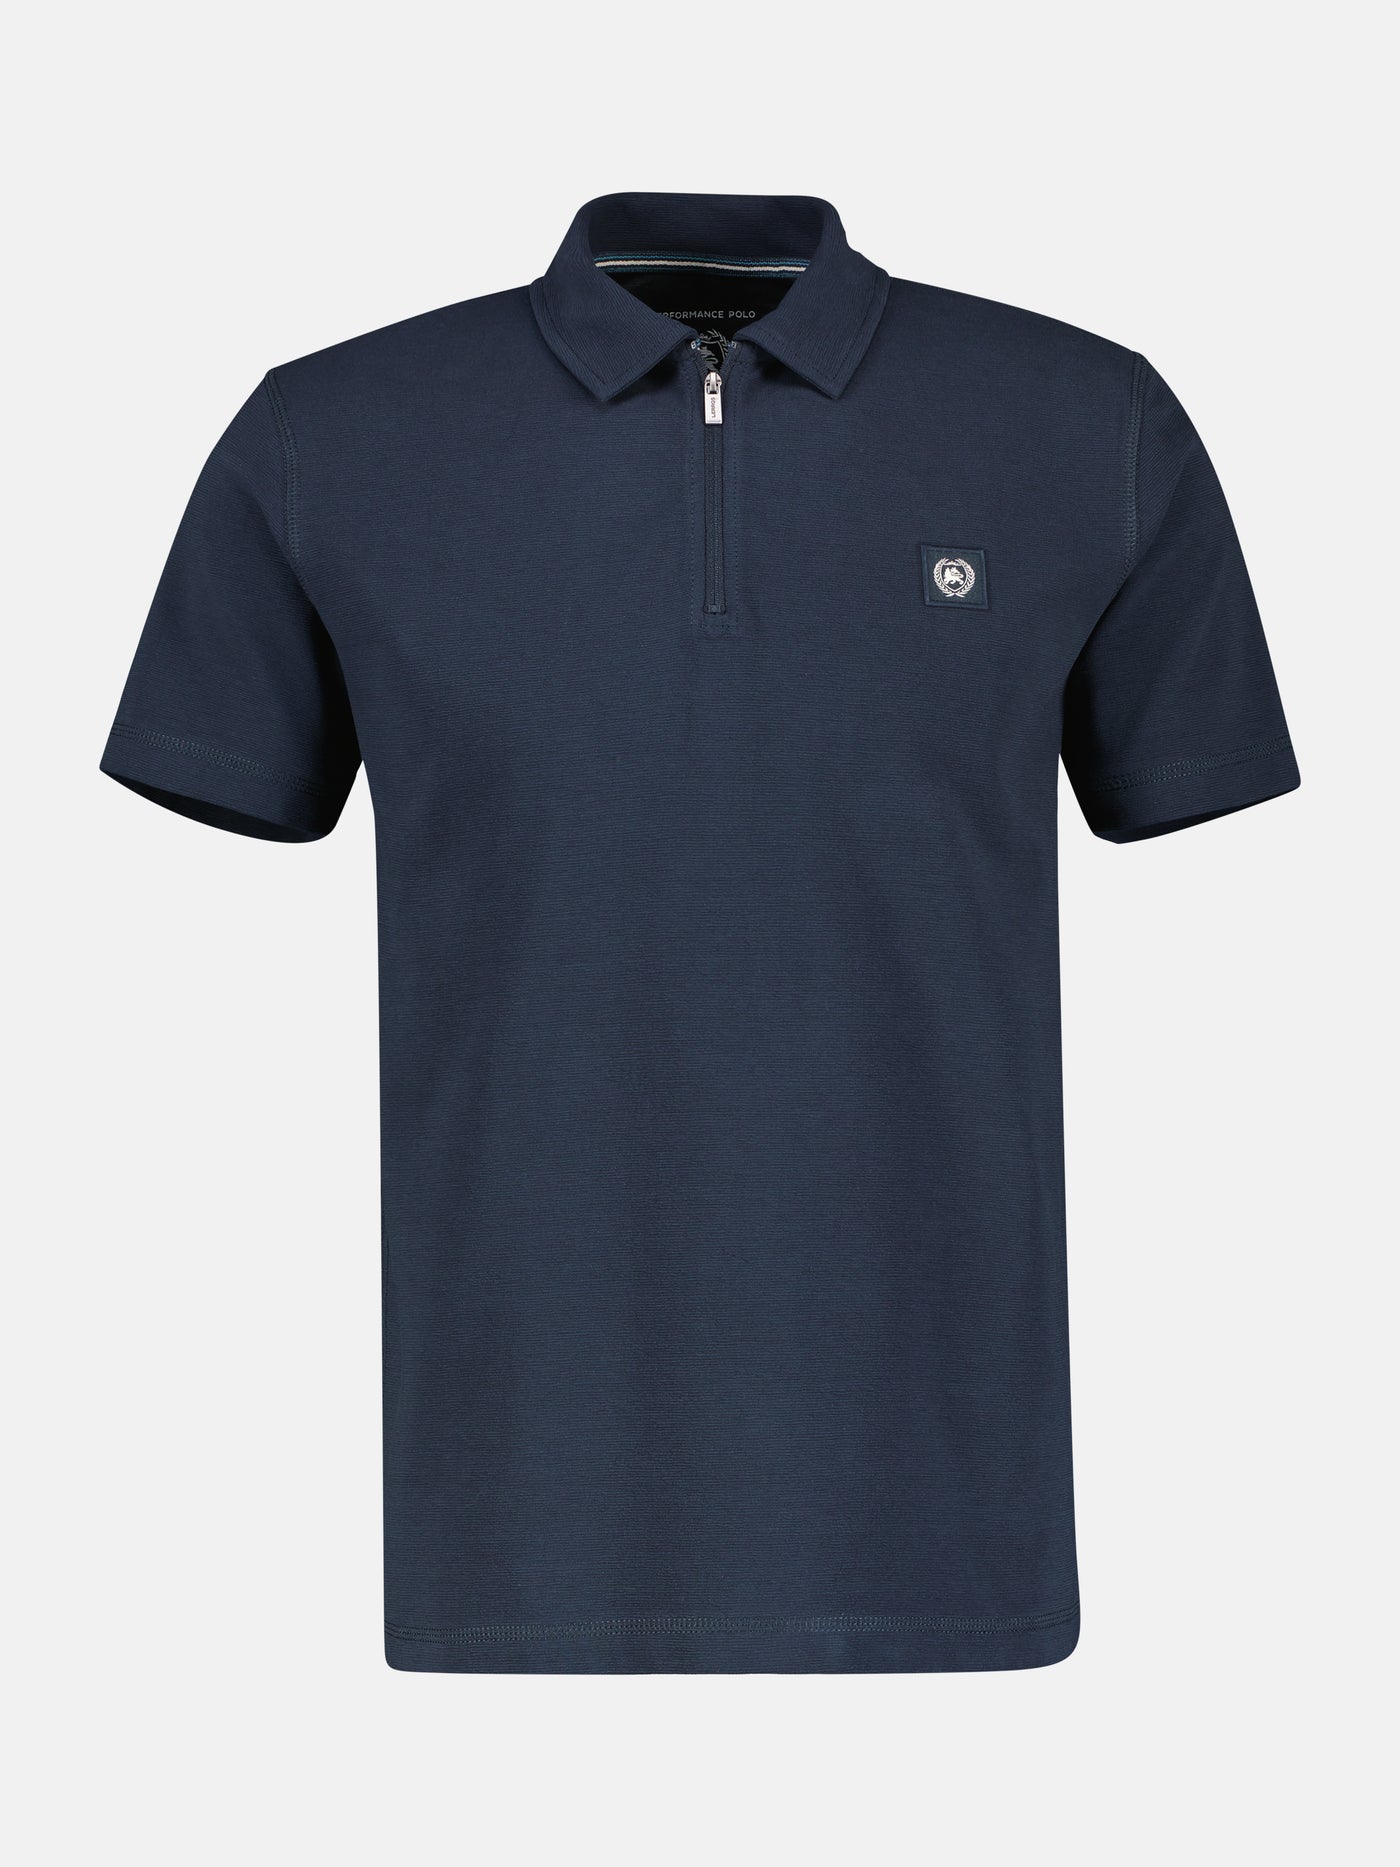 Polo shirt in Cool &amp; Dry quality, with zip collar